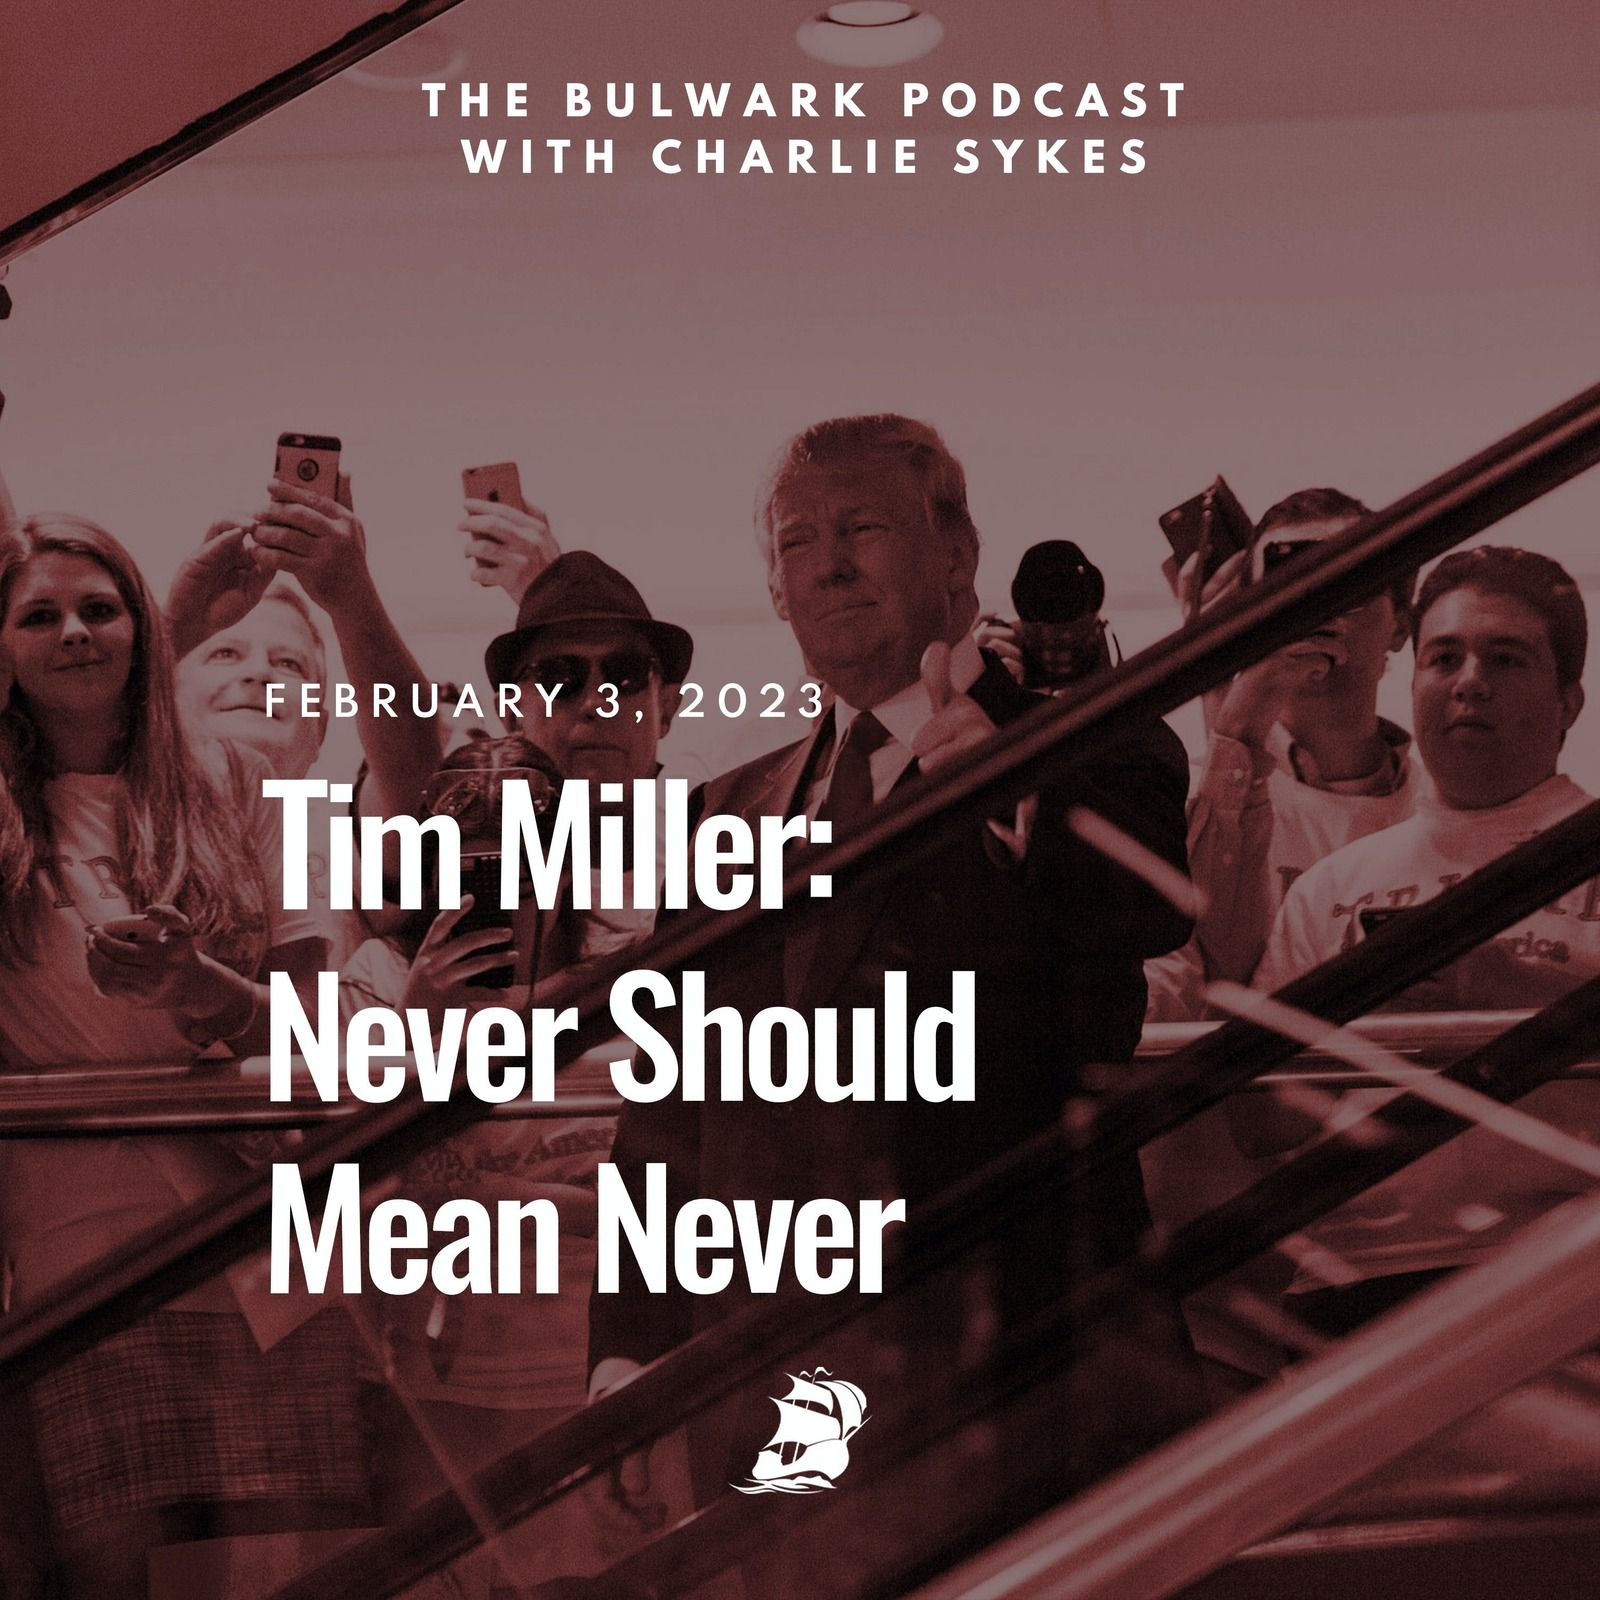 Tim Miller: Never Should Mean Never by The Bulwark Podcast